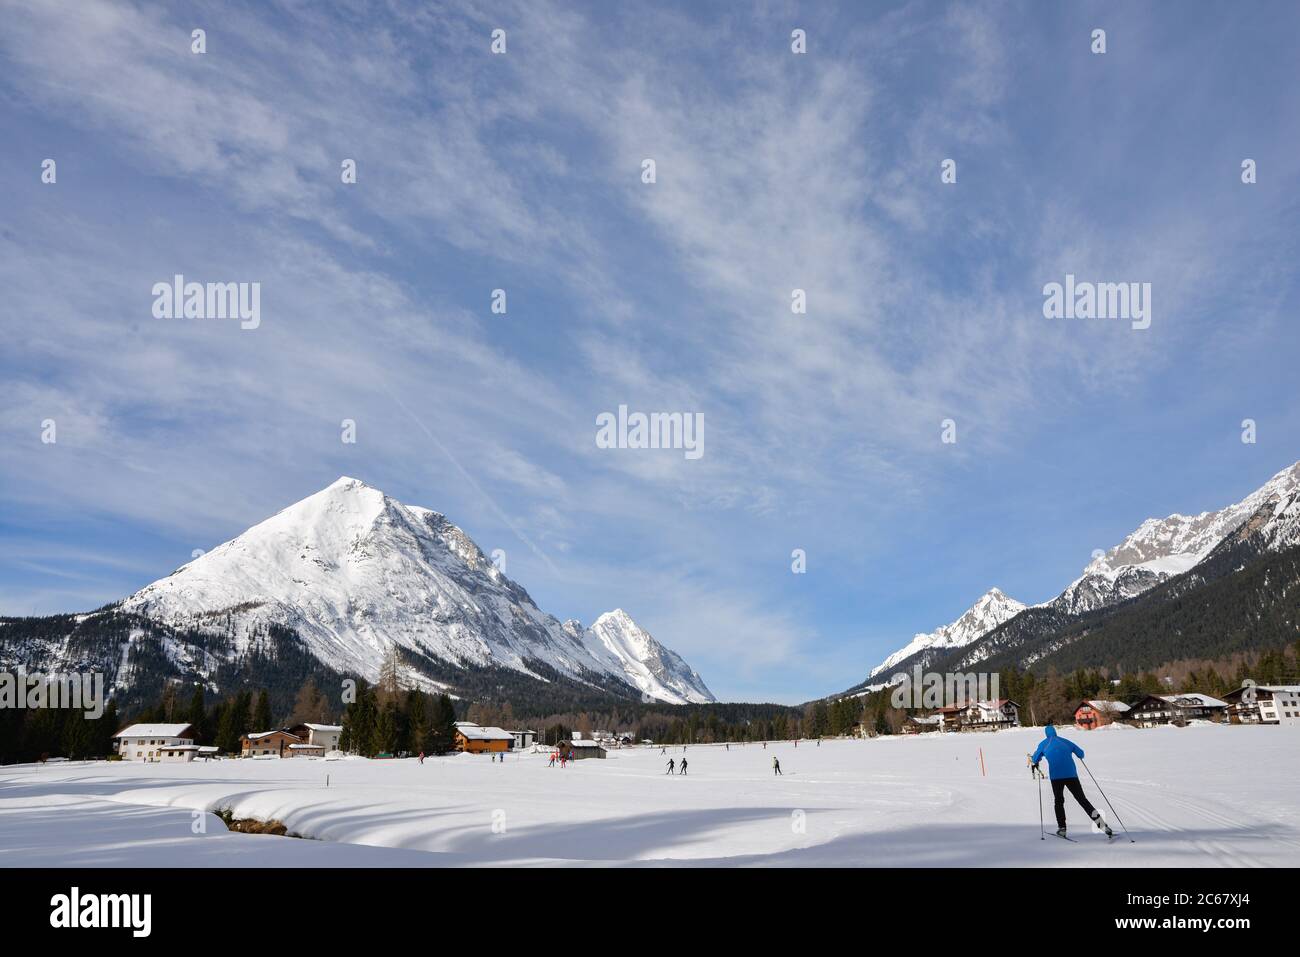 Cross-country skiing on the large network of trails near Leutasch, Austria, in the Seefeld region. Stock Photo